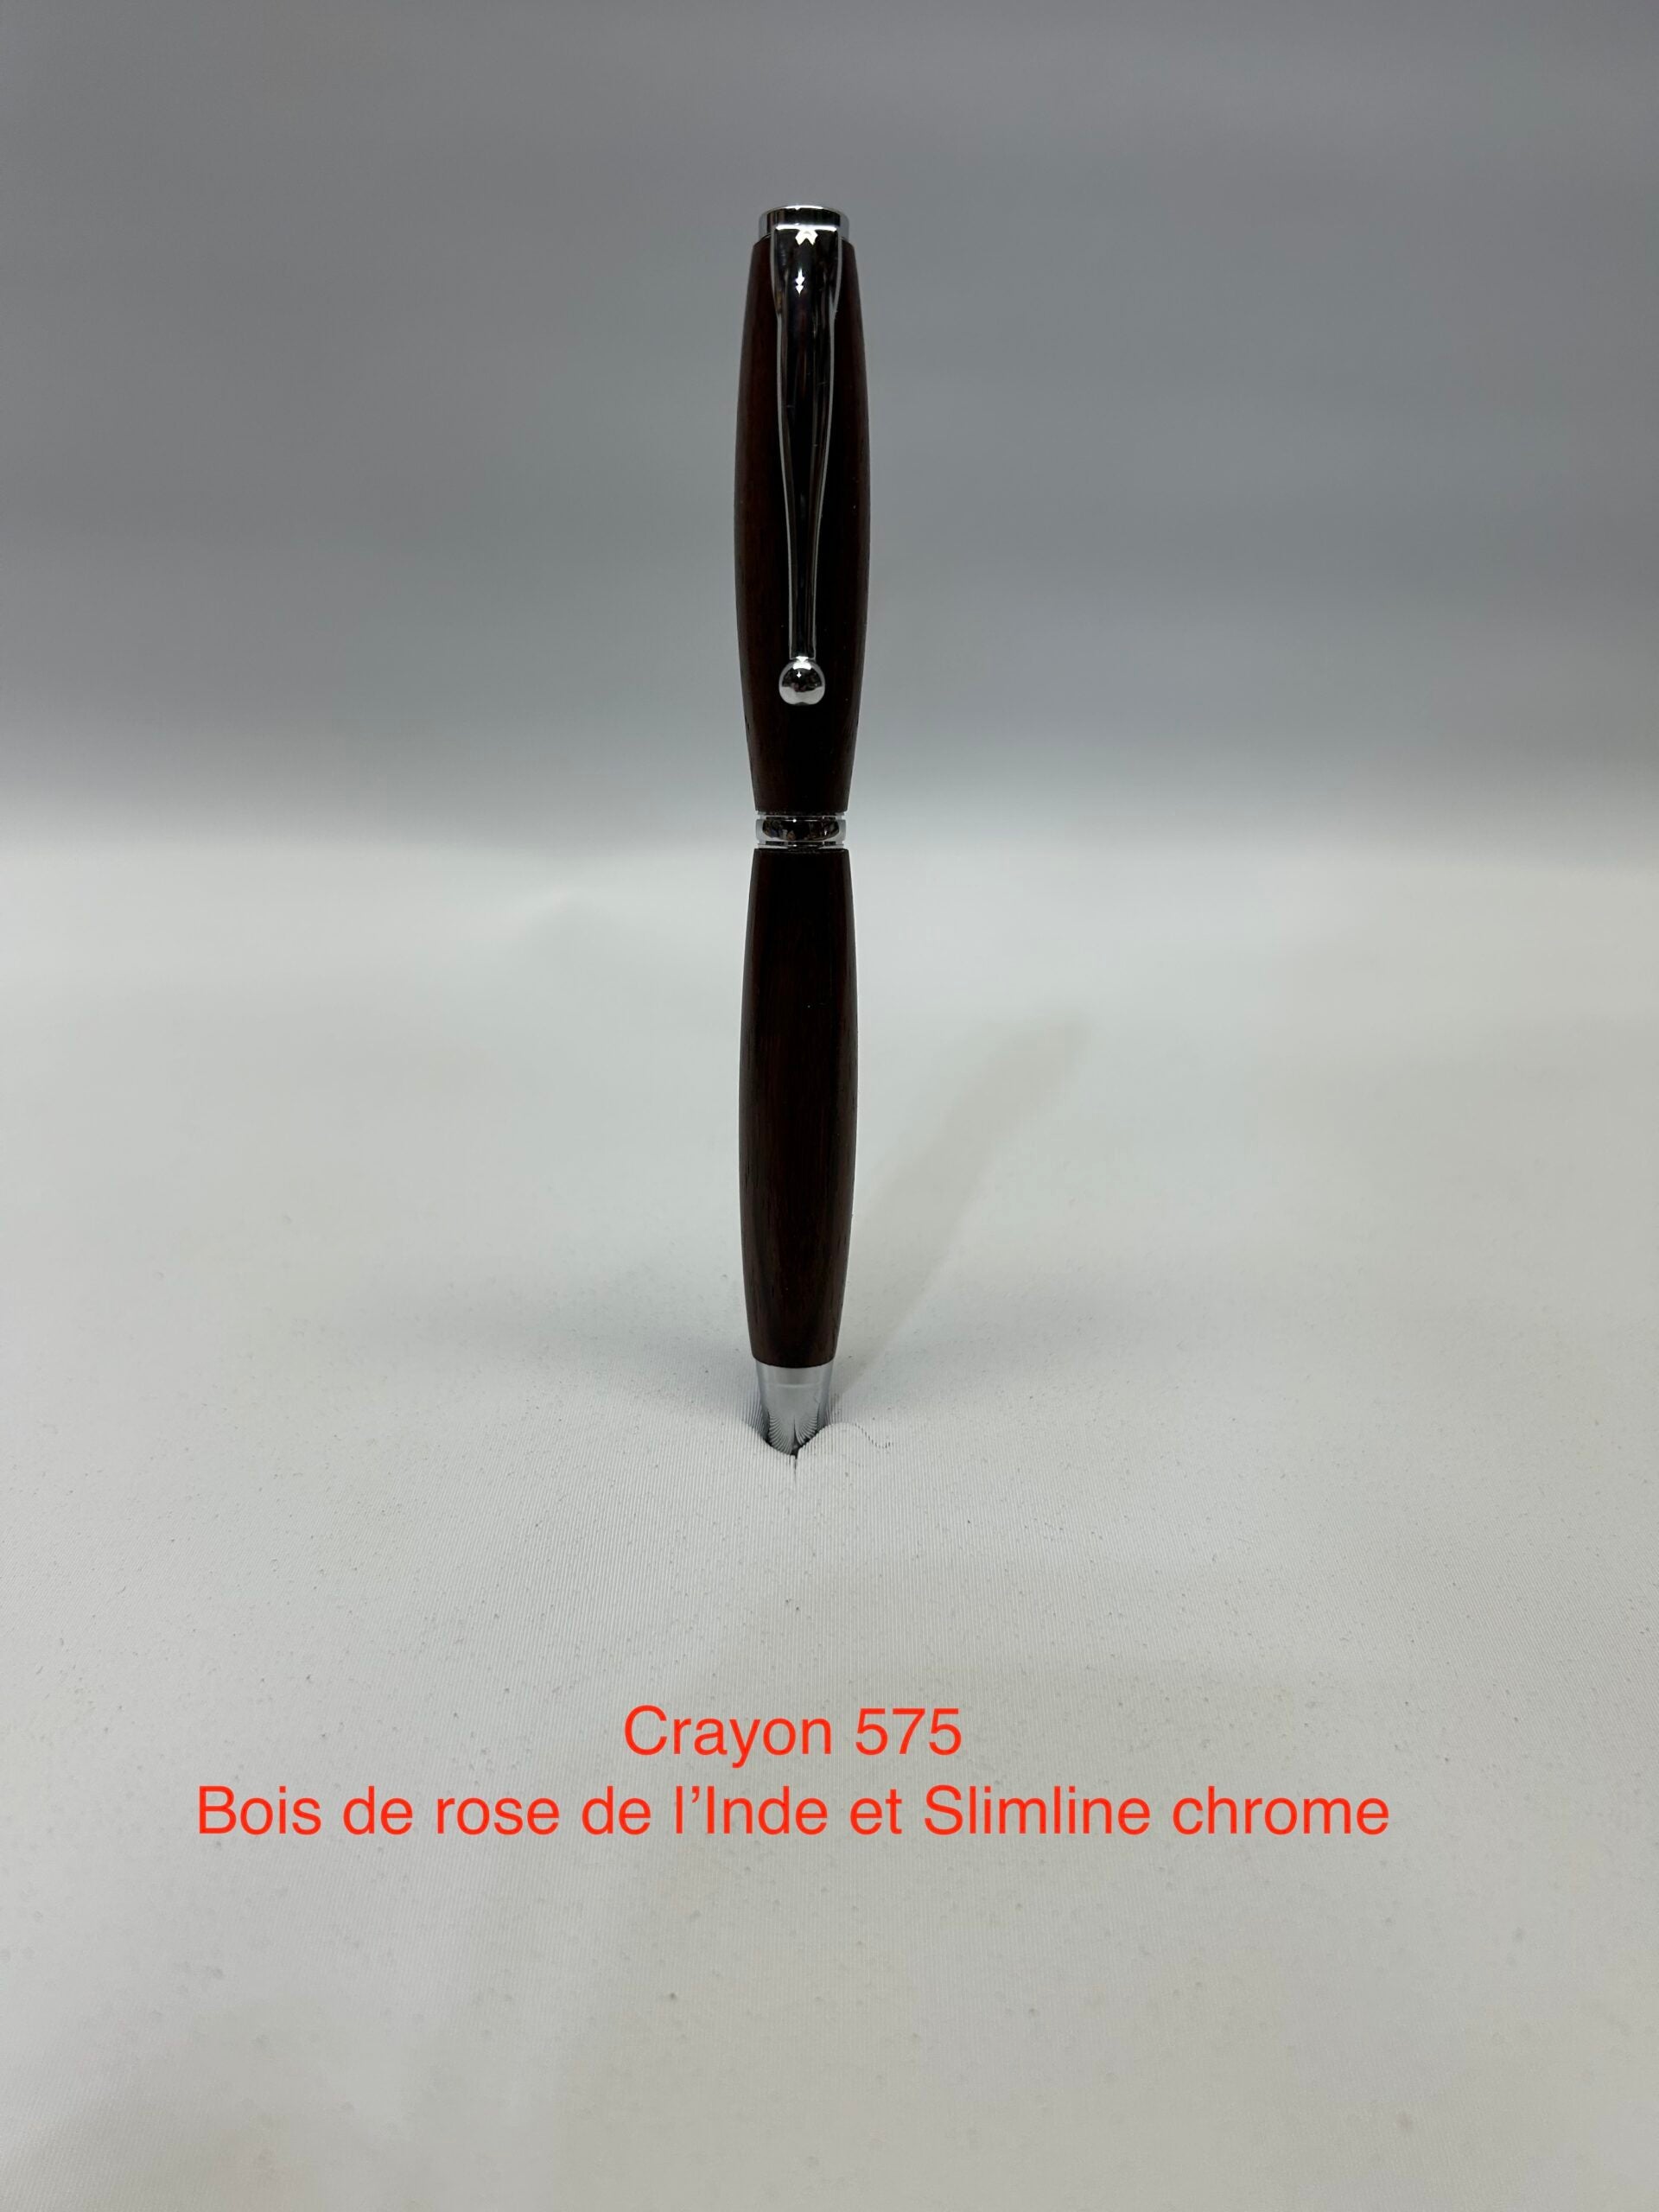 Slim line, Indian rosewood and chrome